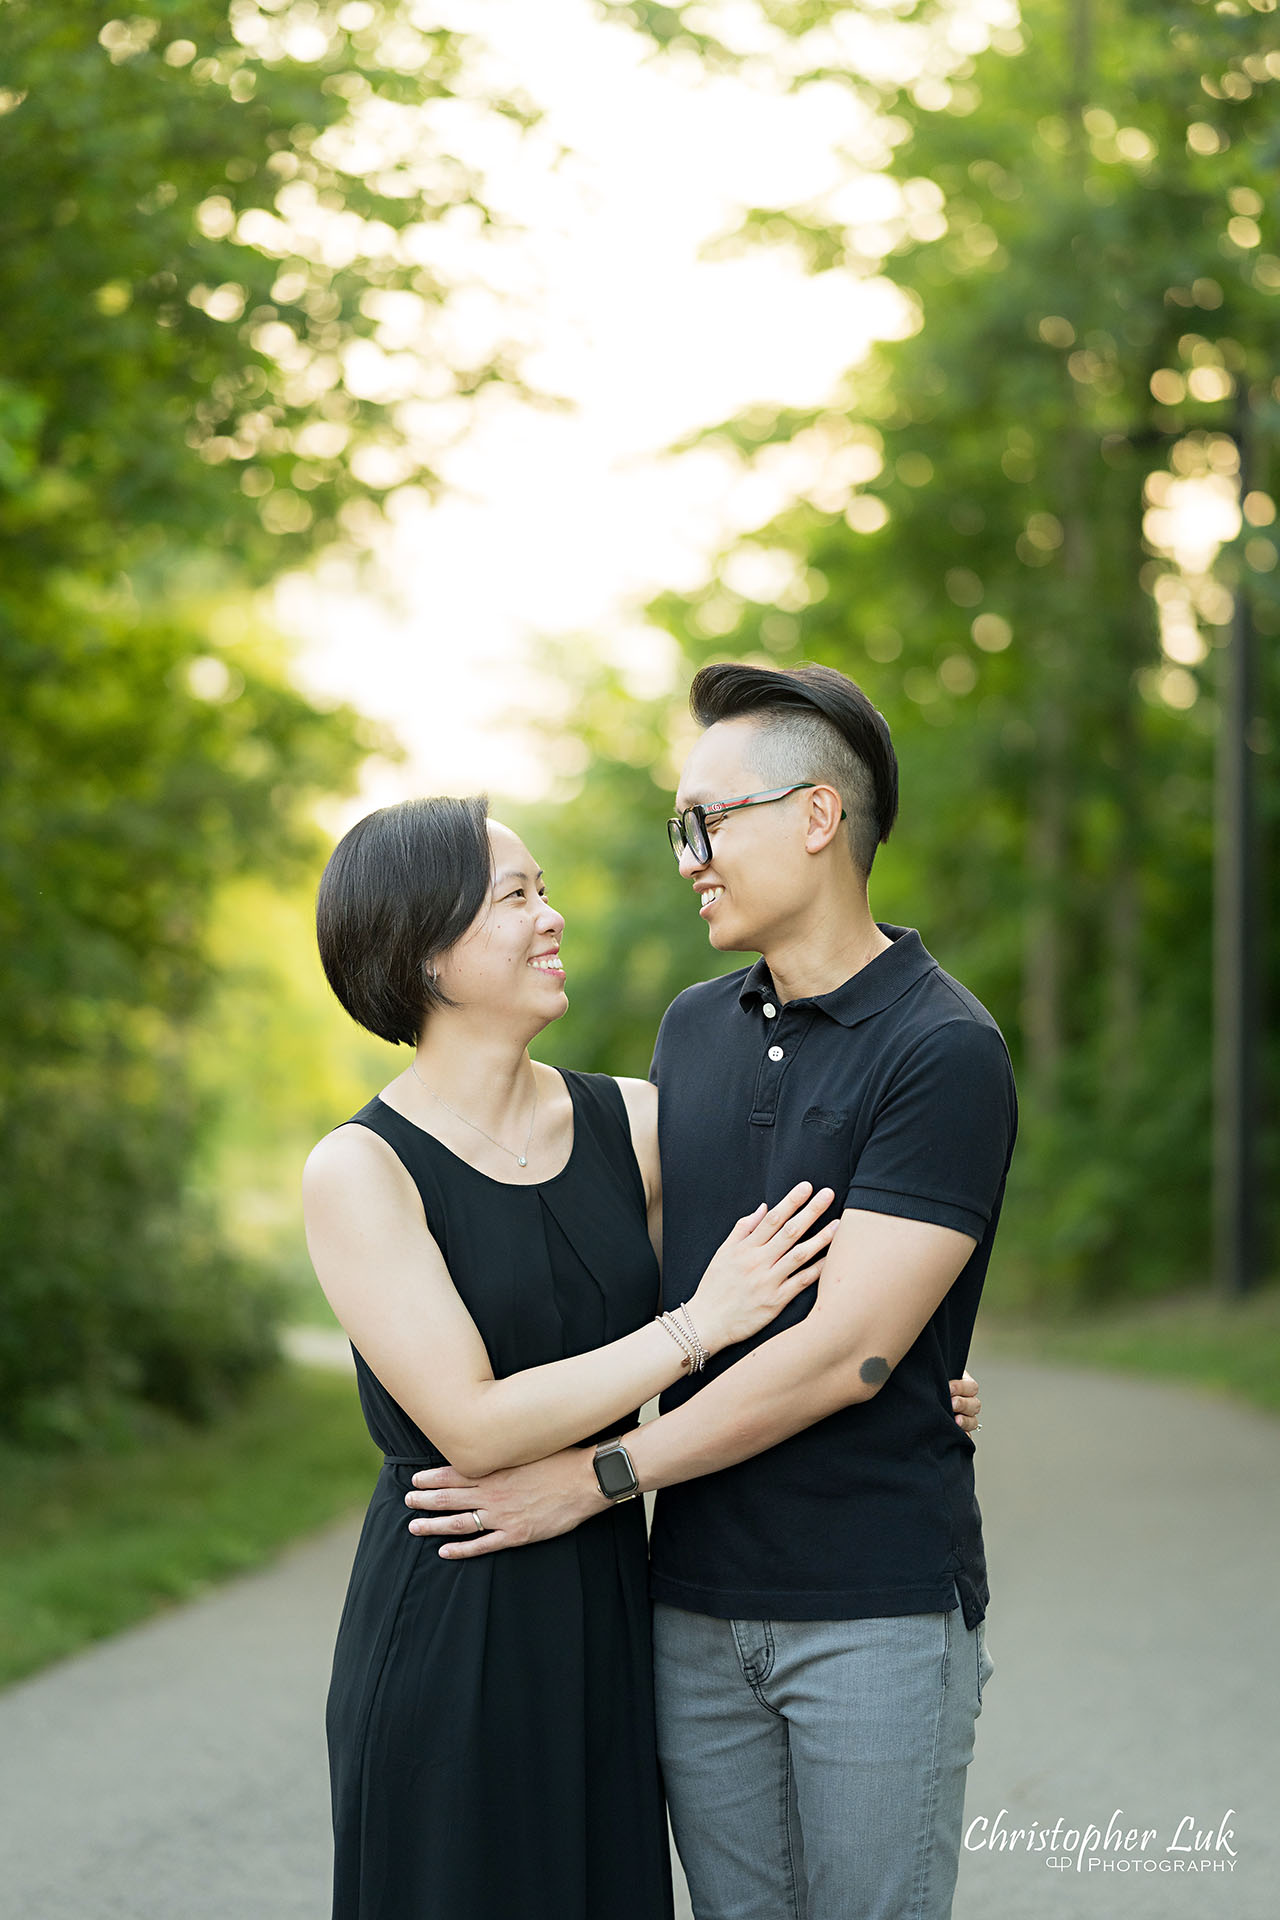 Toronto Woodbridge Vaughan Family Photographer Christopher Luk Candid Natural Photojournalistic Organic Happy Joyful Mother Father Husband Wife Hugging Holding Each Other Portrait